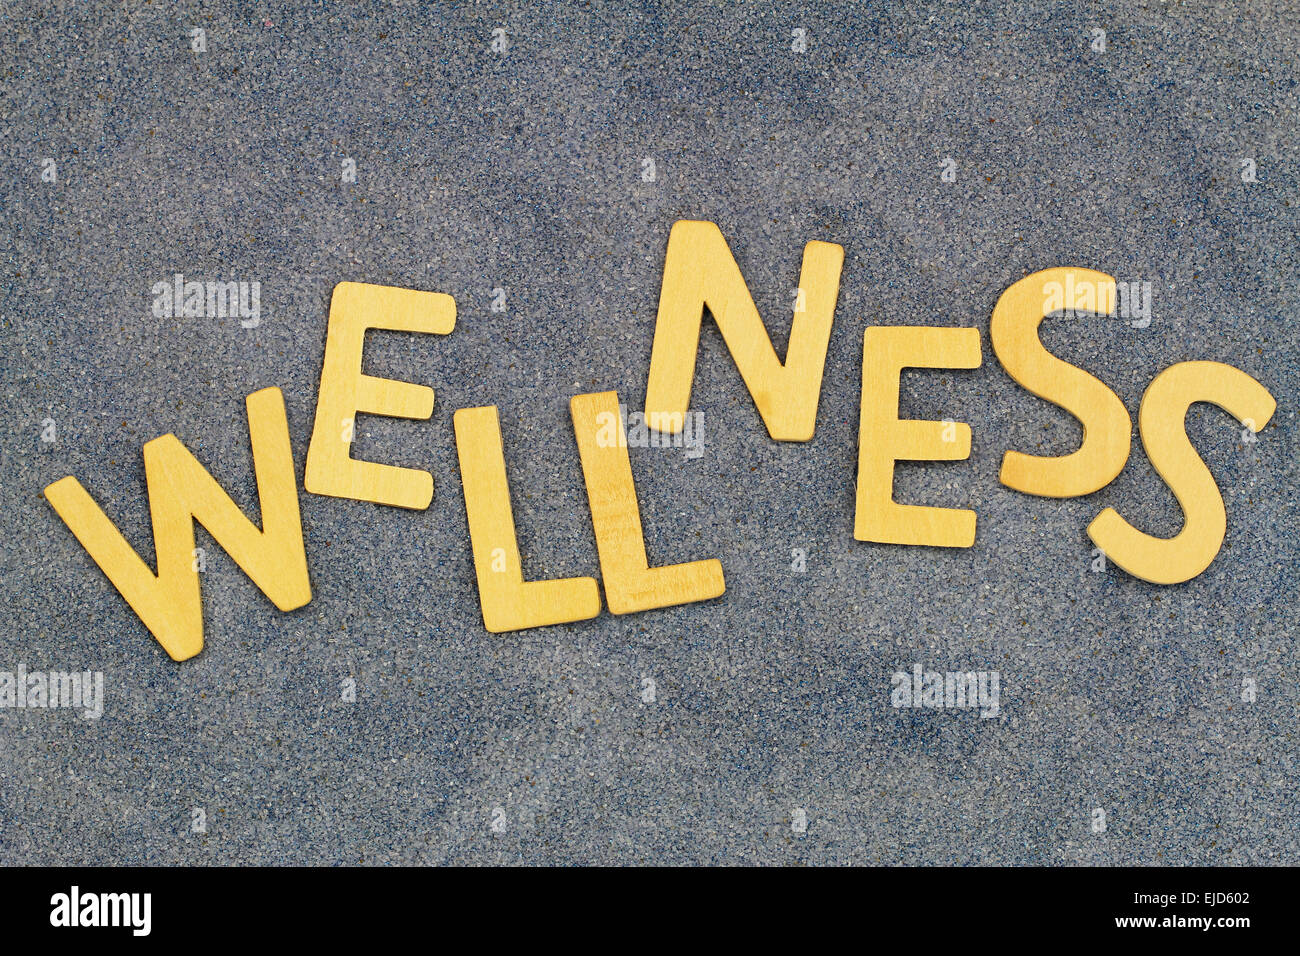 Wellness written with wooden letters on blue sand Stock Photo